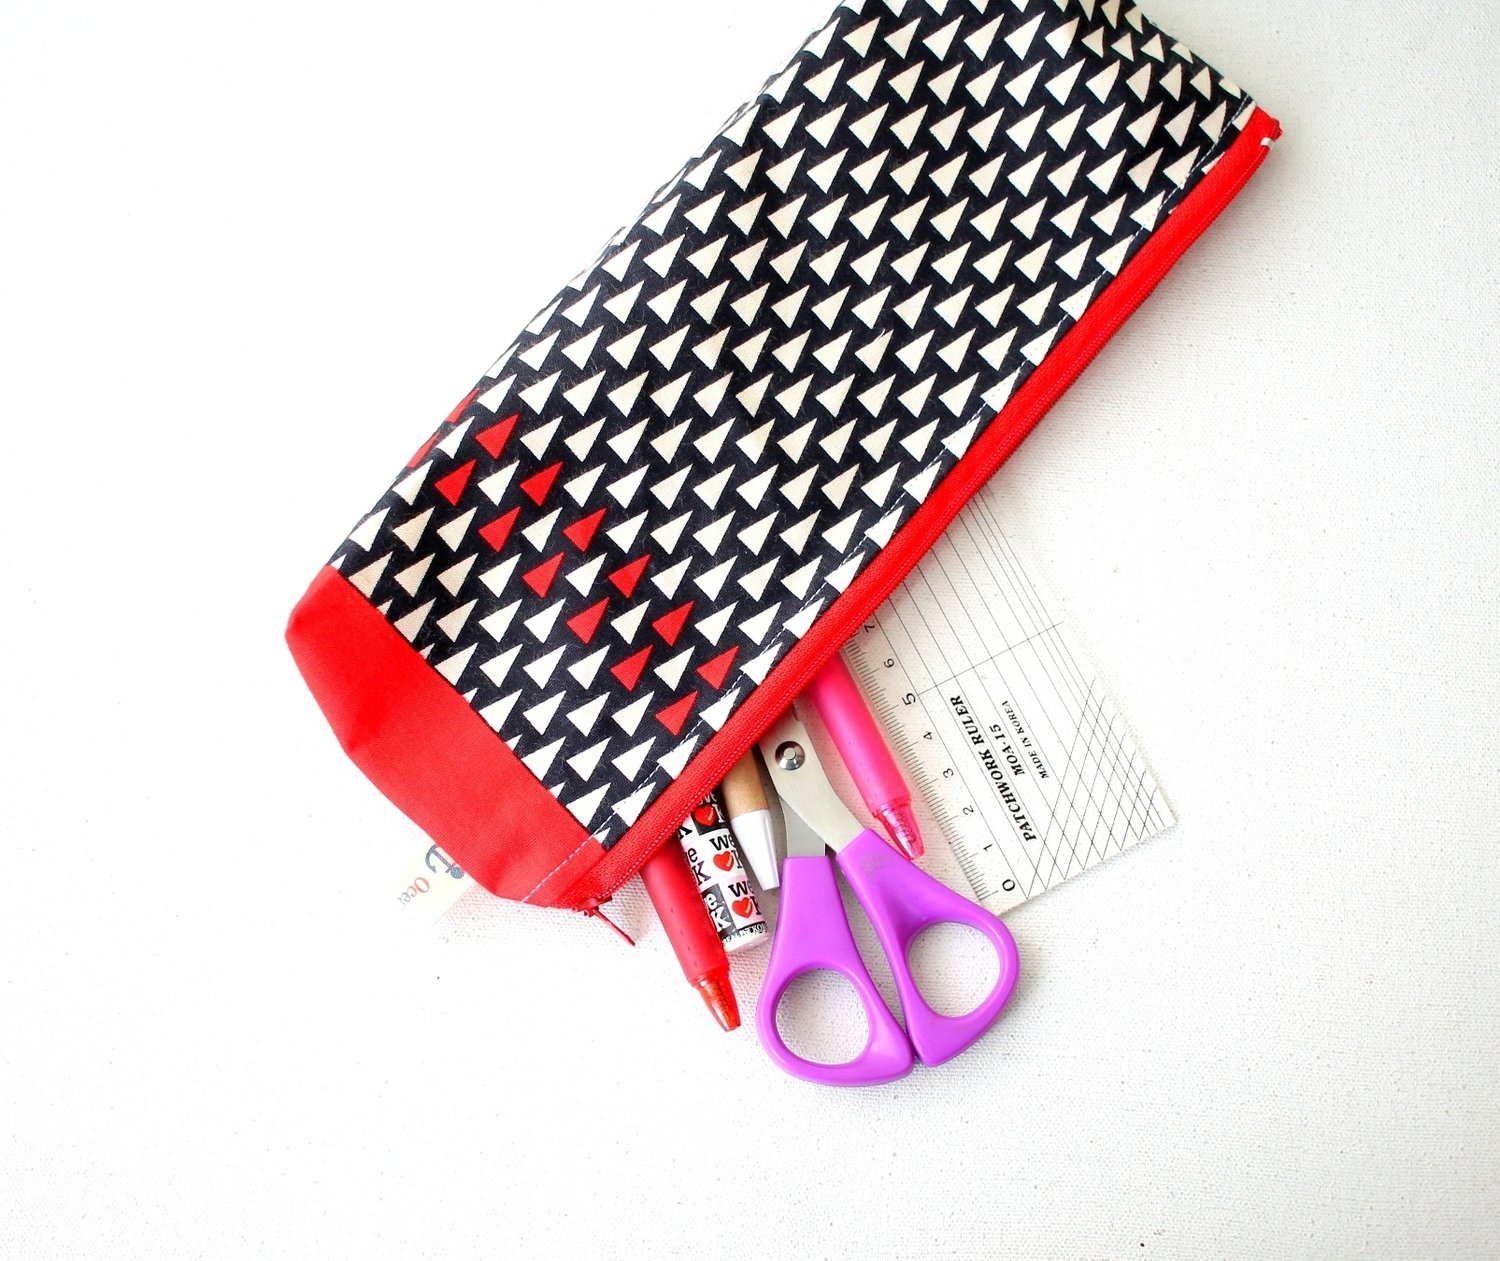 Handmade Red and Black  Zipper Pouch - One of a kind - Medium Size